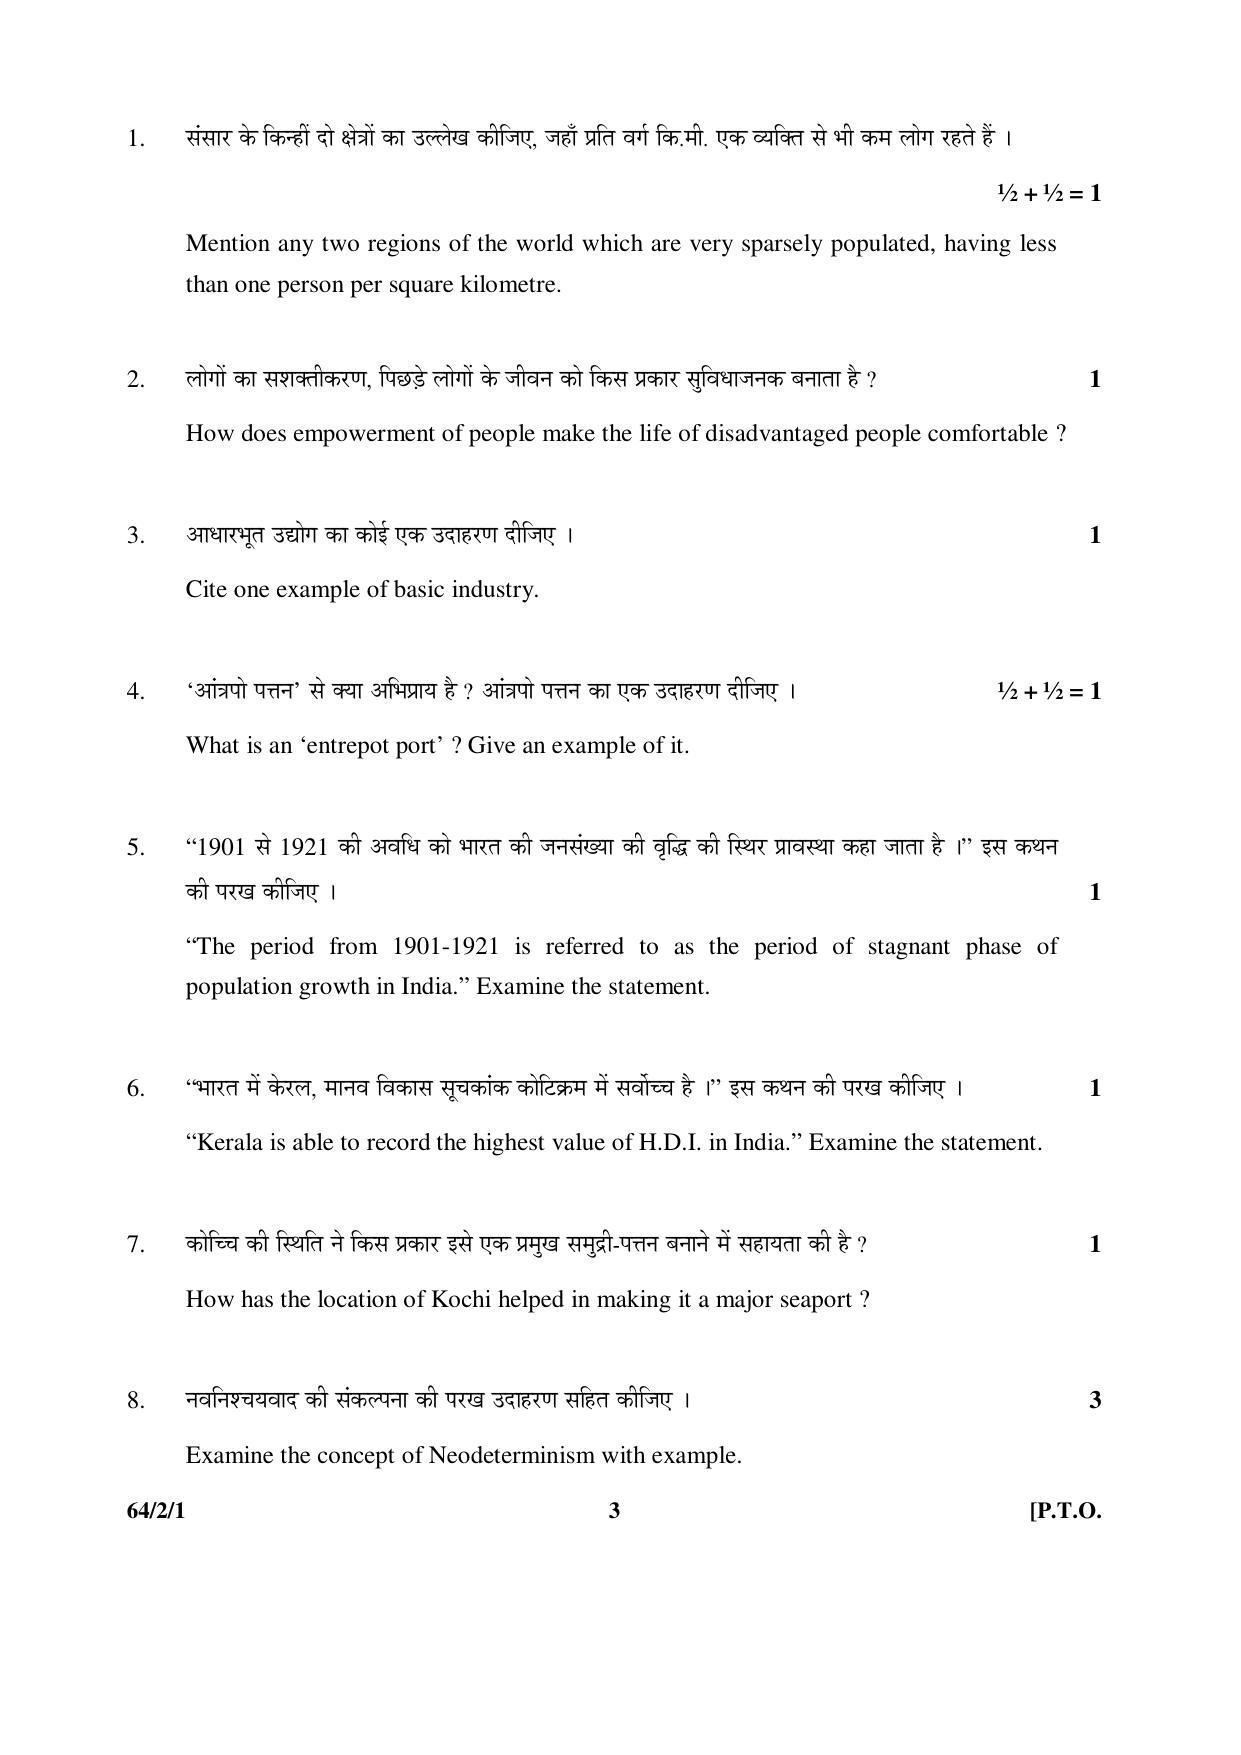 CBSE Class 12 64-2-1 Geography 2016 Question Paper - Page 3